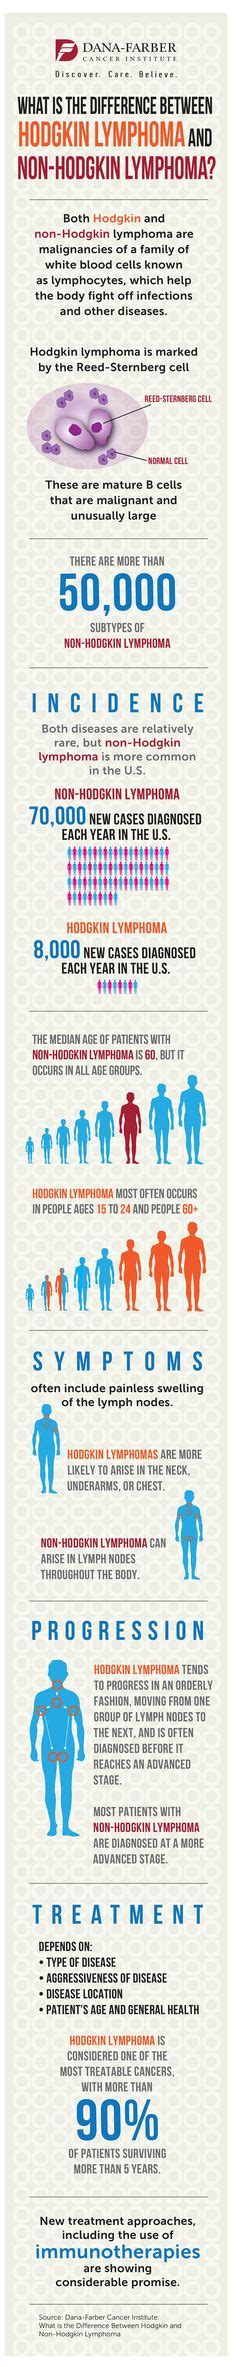 Whats The Difference Between Hodgkin And Non Hodgkin Lymphoma